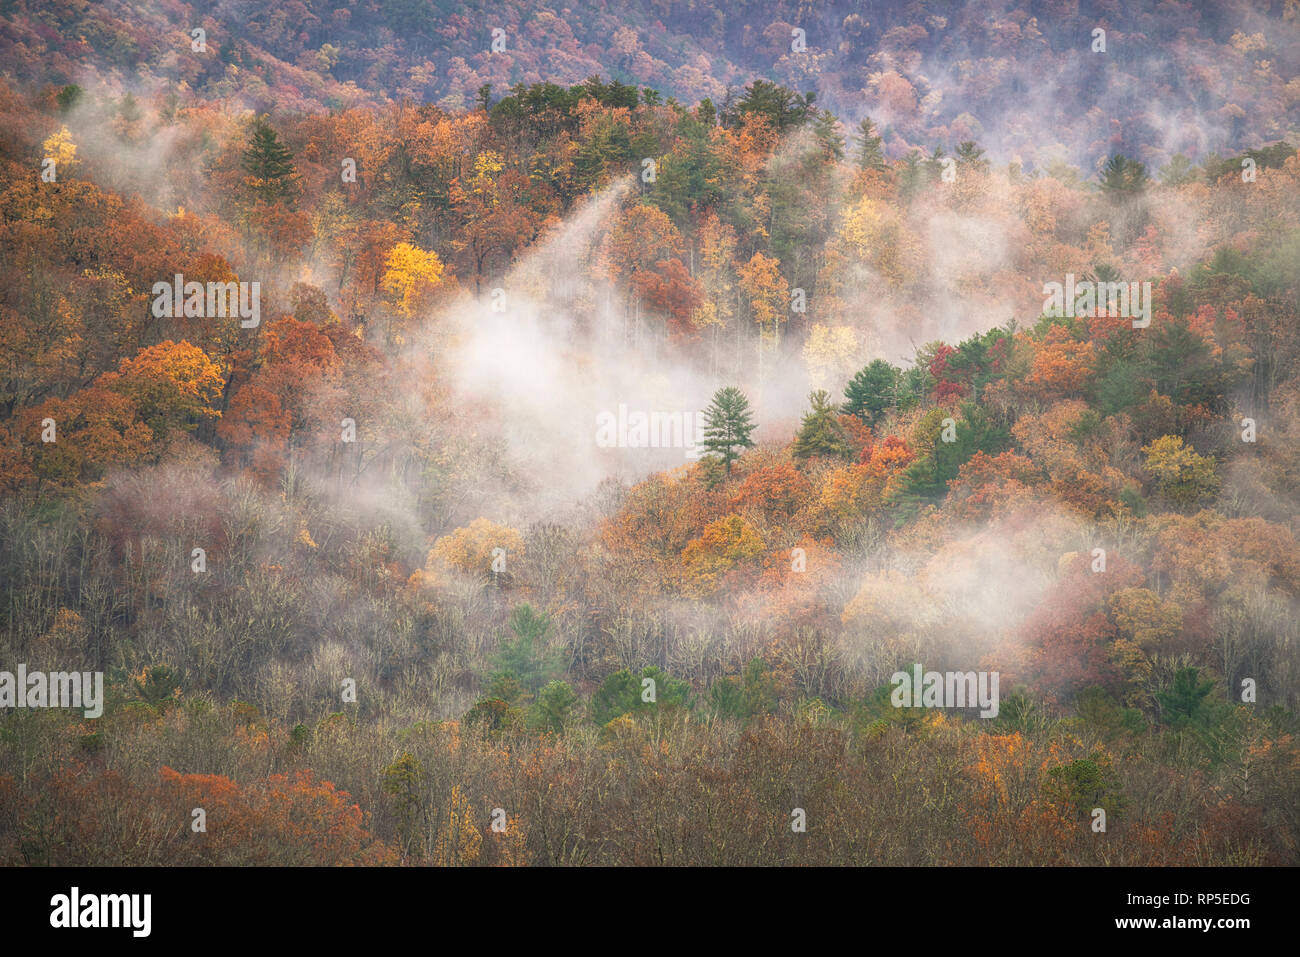 Fog ebbs and flows amidst autumn leaves in Cades Cove, Great Smoky Mountains National Park, Tennessee Stock Photo